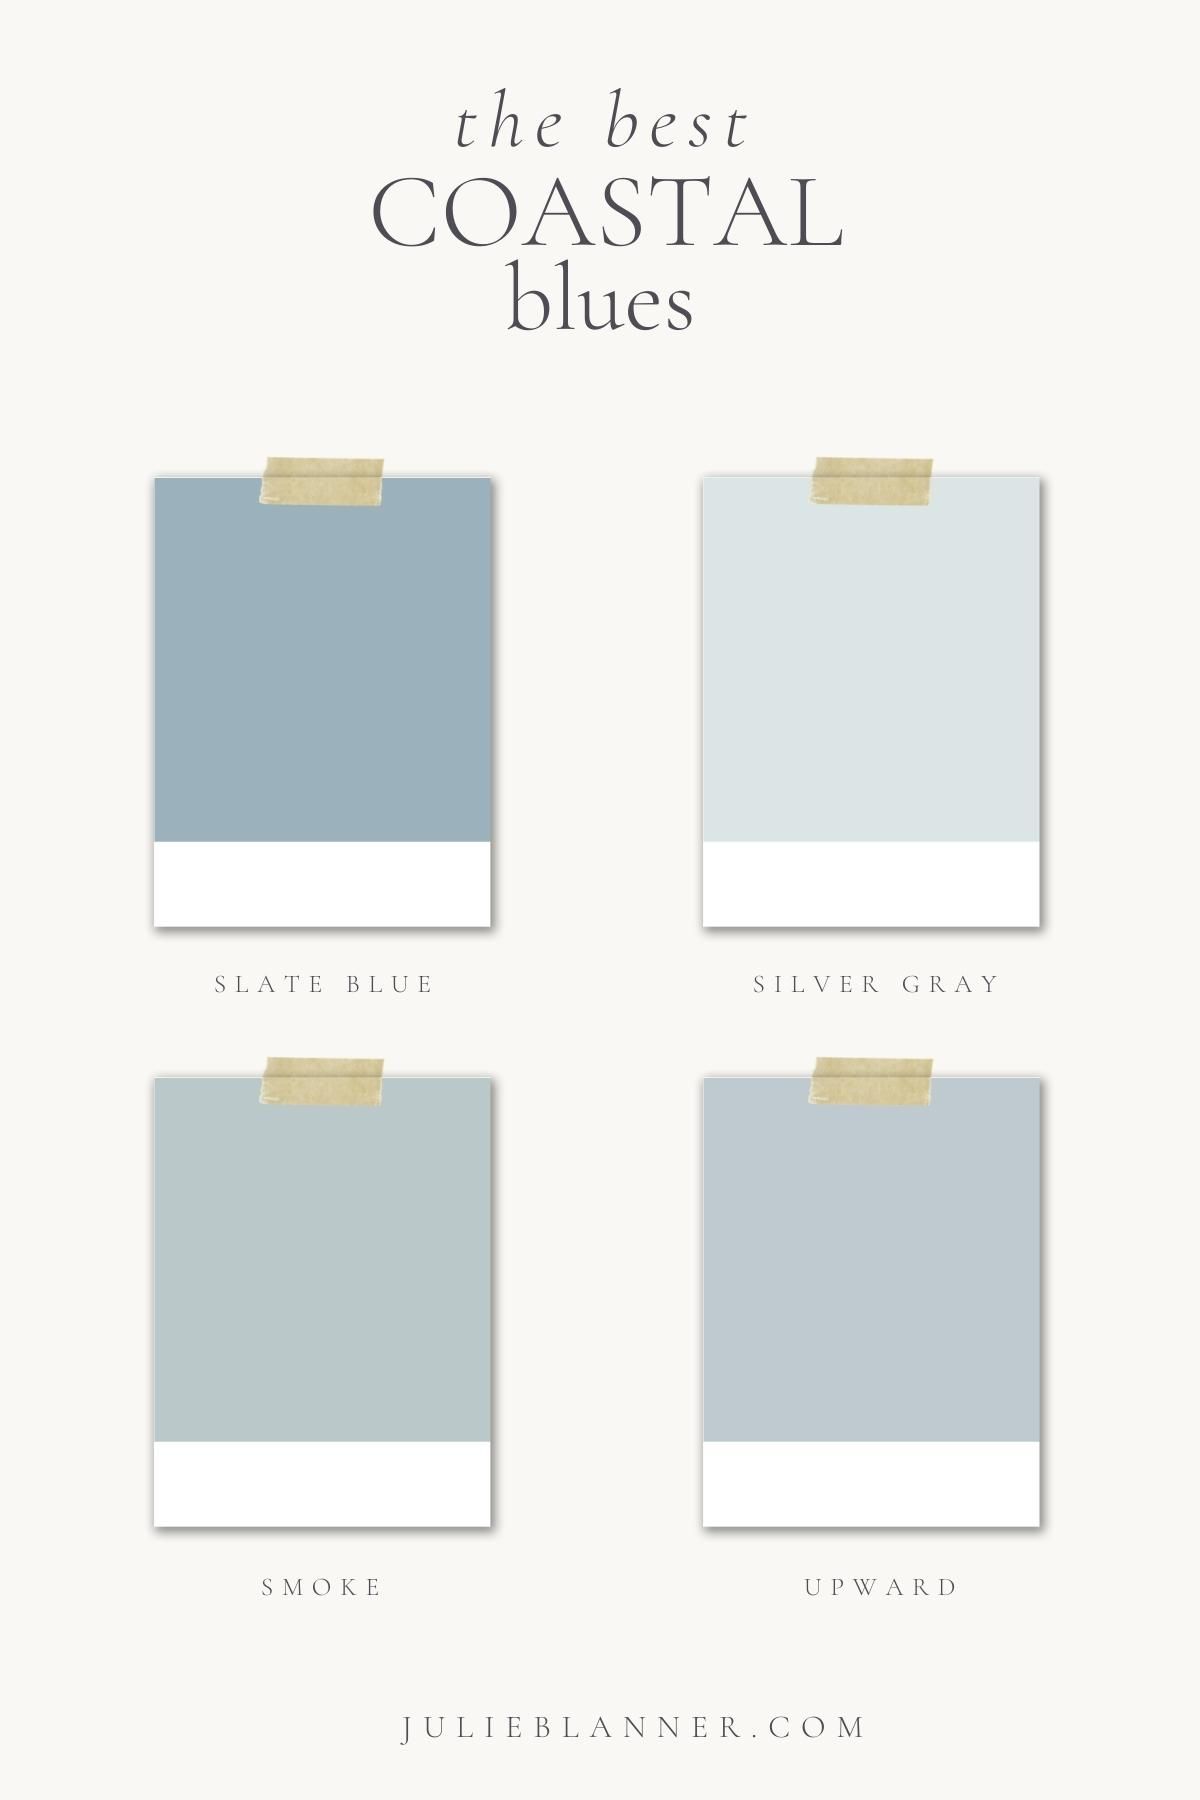 A graphic featuring four paint swatches with coastal blues